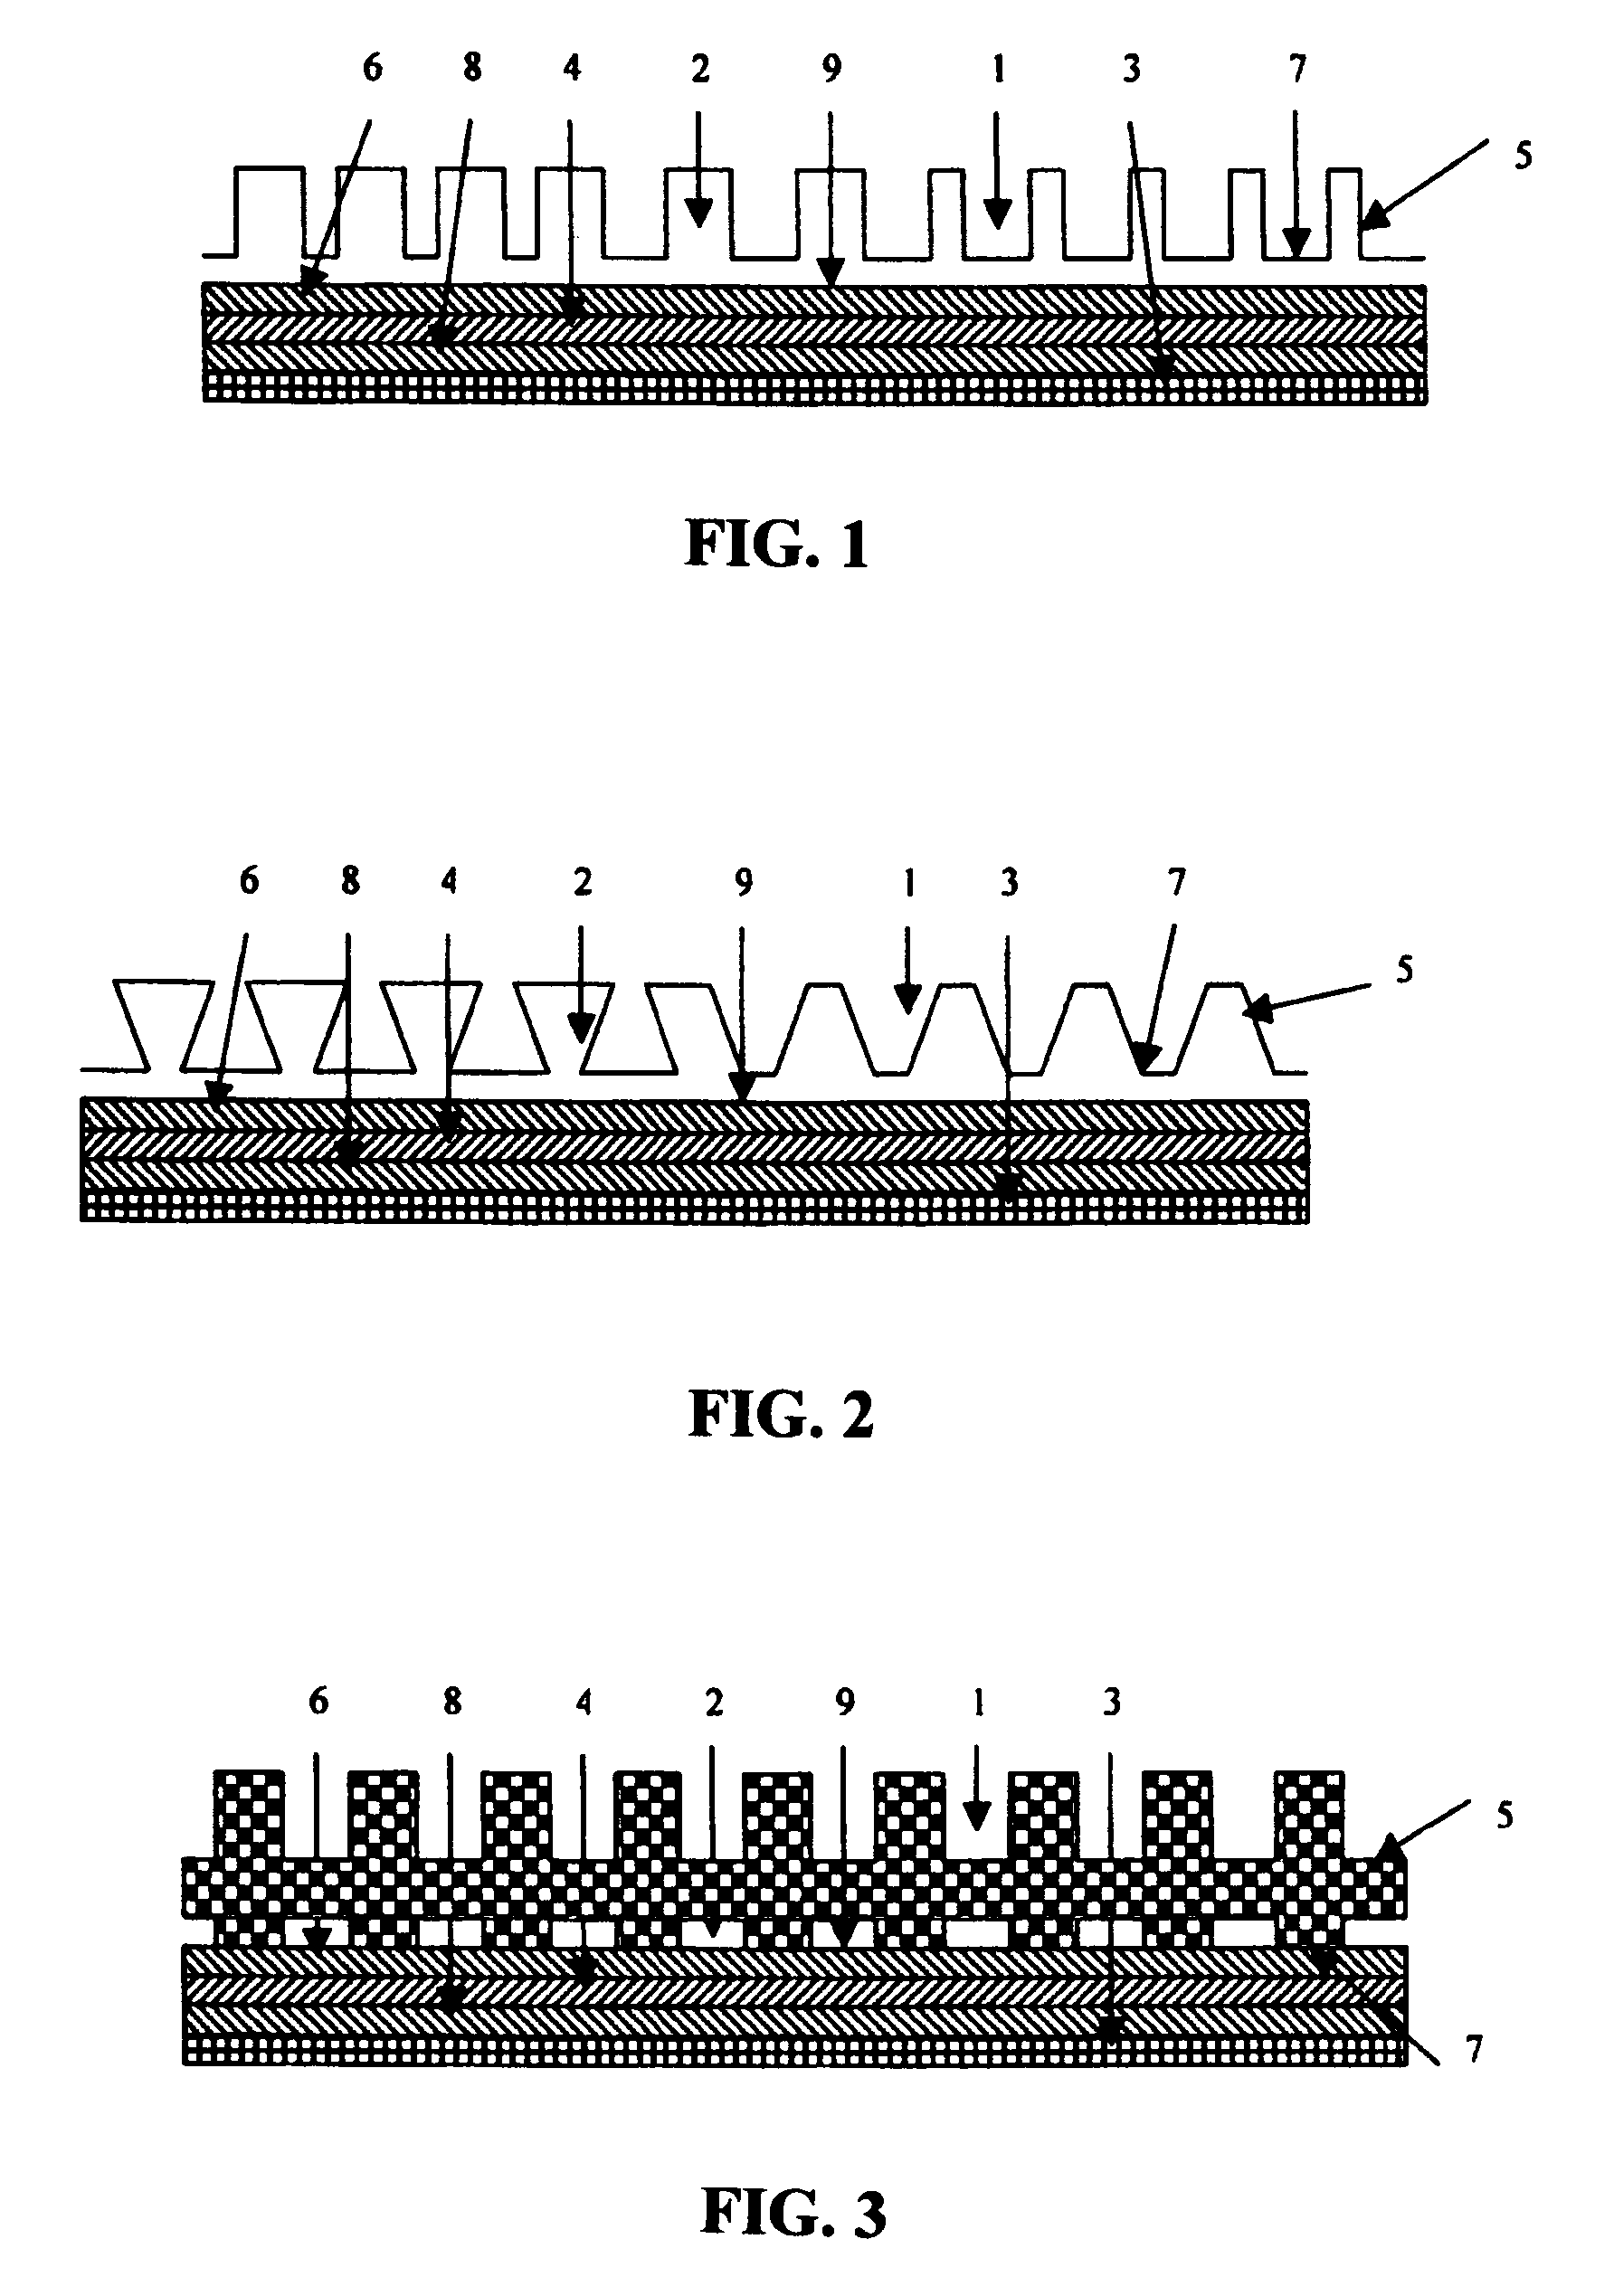 Electrochemical Device Comprising One or More Fuel Cells